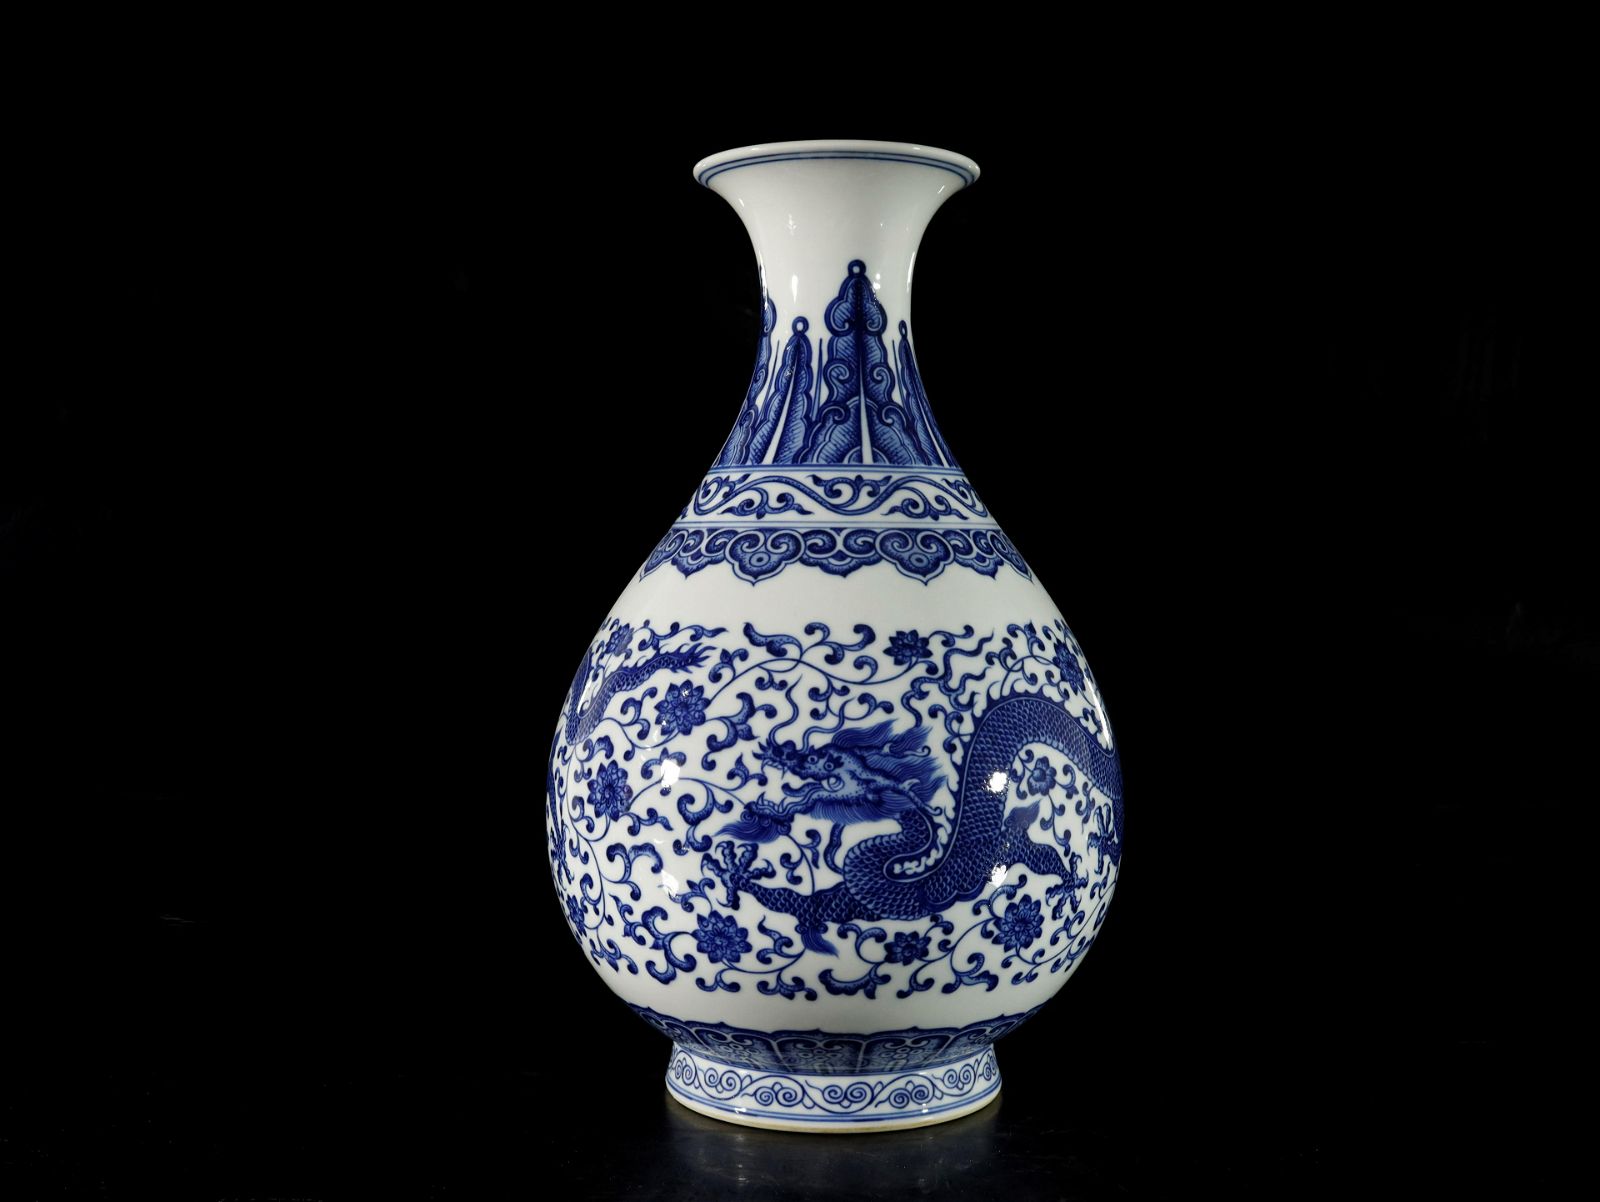 A FINE BLUE AND WHITE PEAR-SHAPED